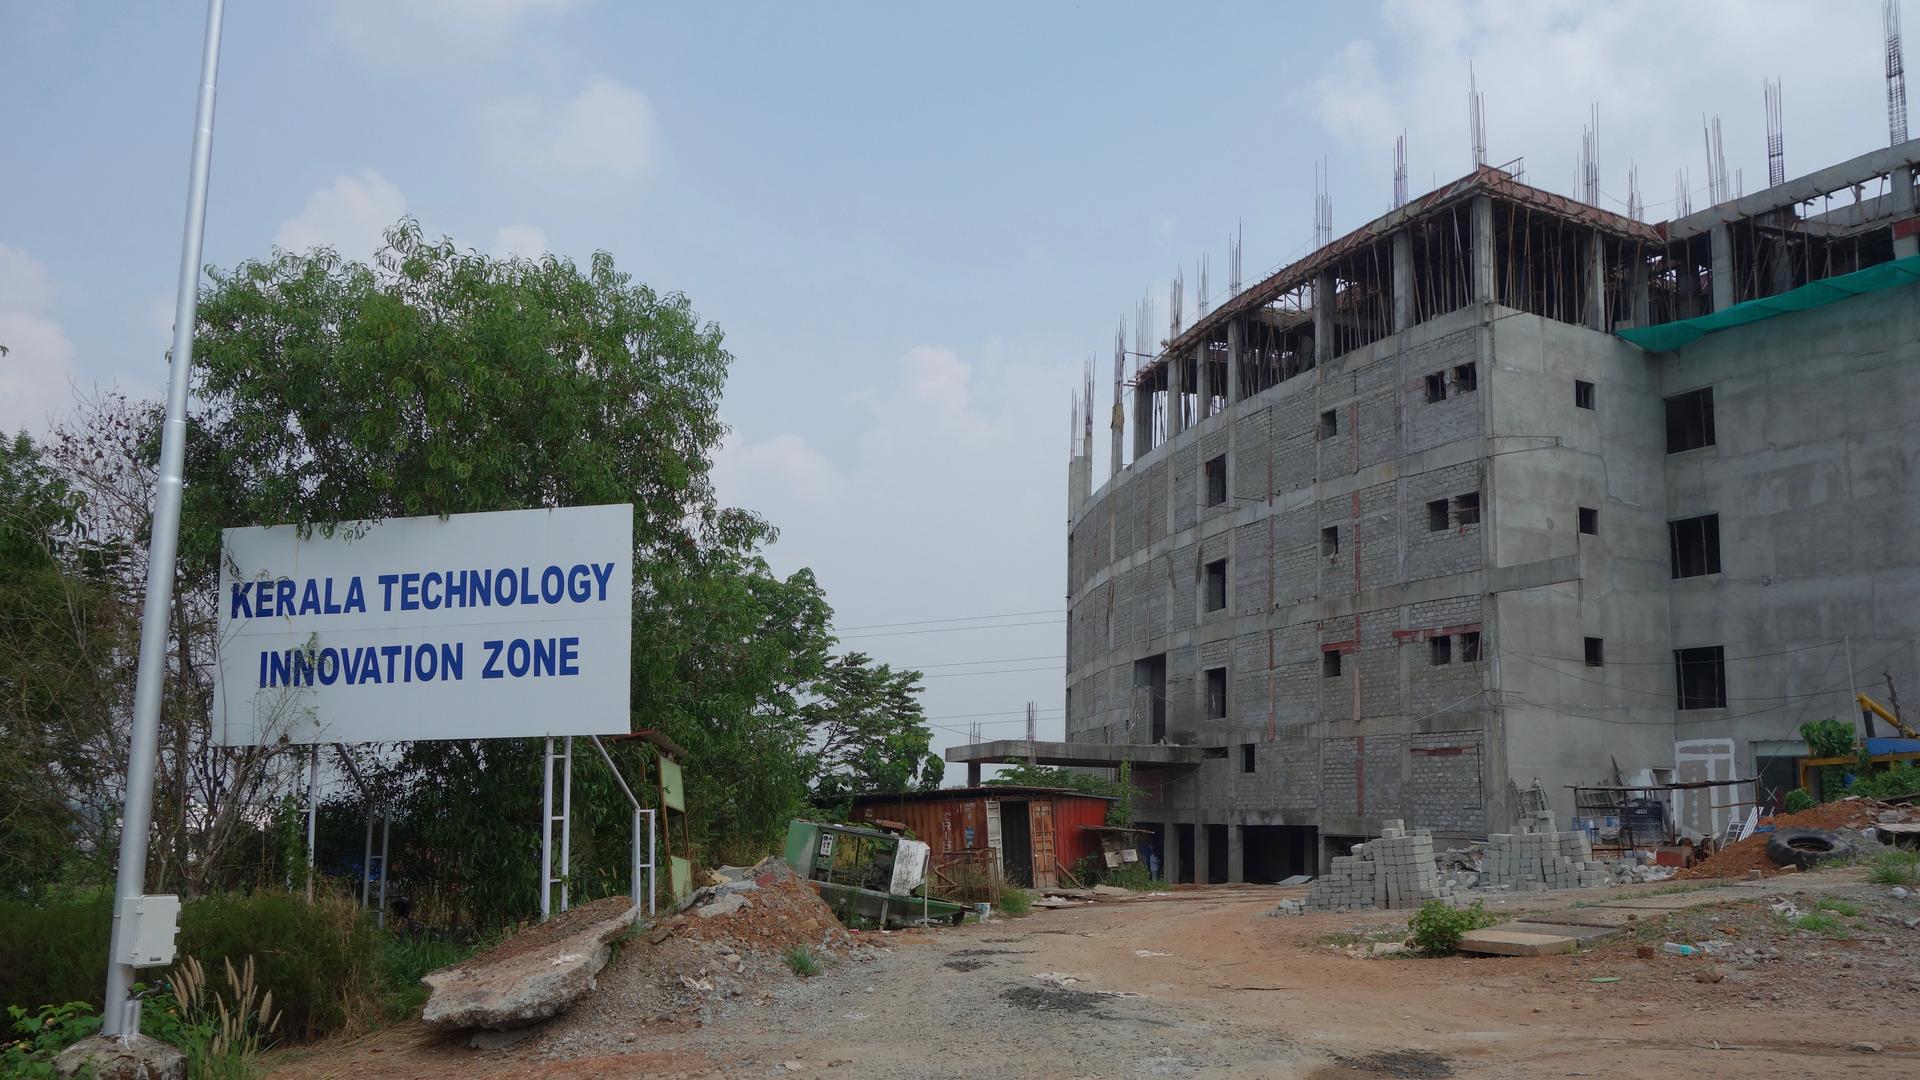 Kerala Technology Innovation Zone, coming soon, aims to be an Internet of Things hub